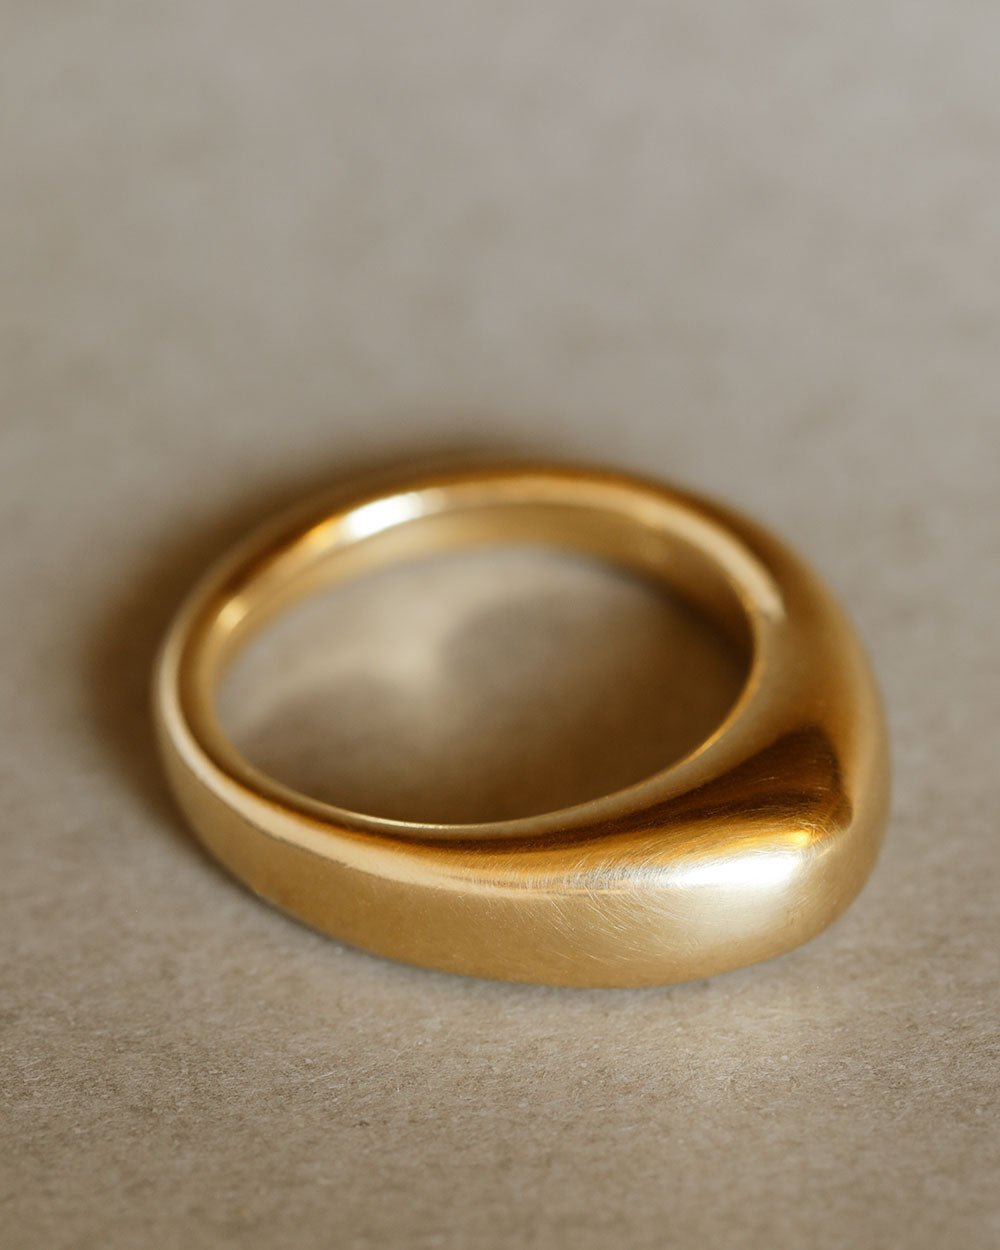 Solid 18k yellow large gold dome ring for weddings and milestones, lying flat on gray paper. Soft curves. Heavy. Not hollow.